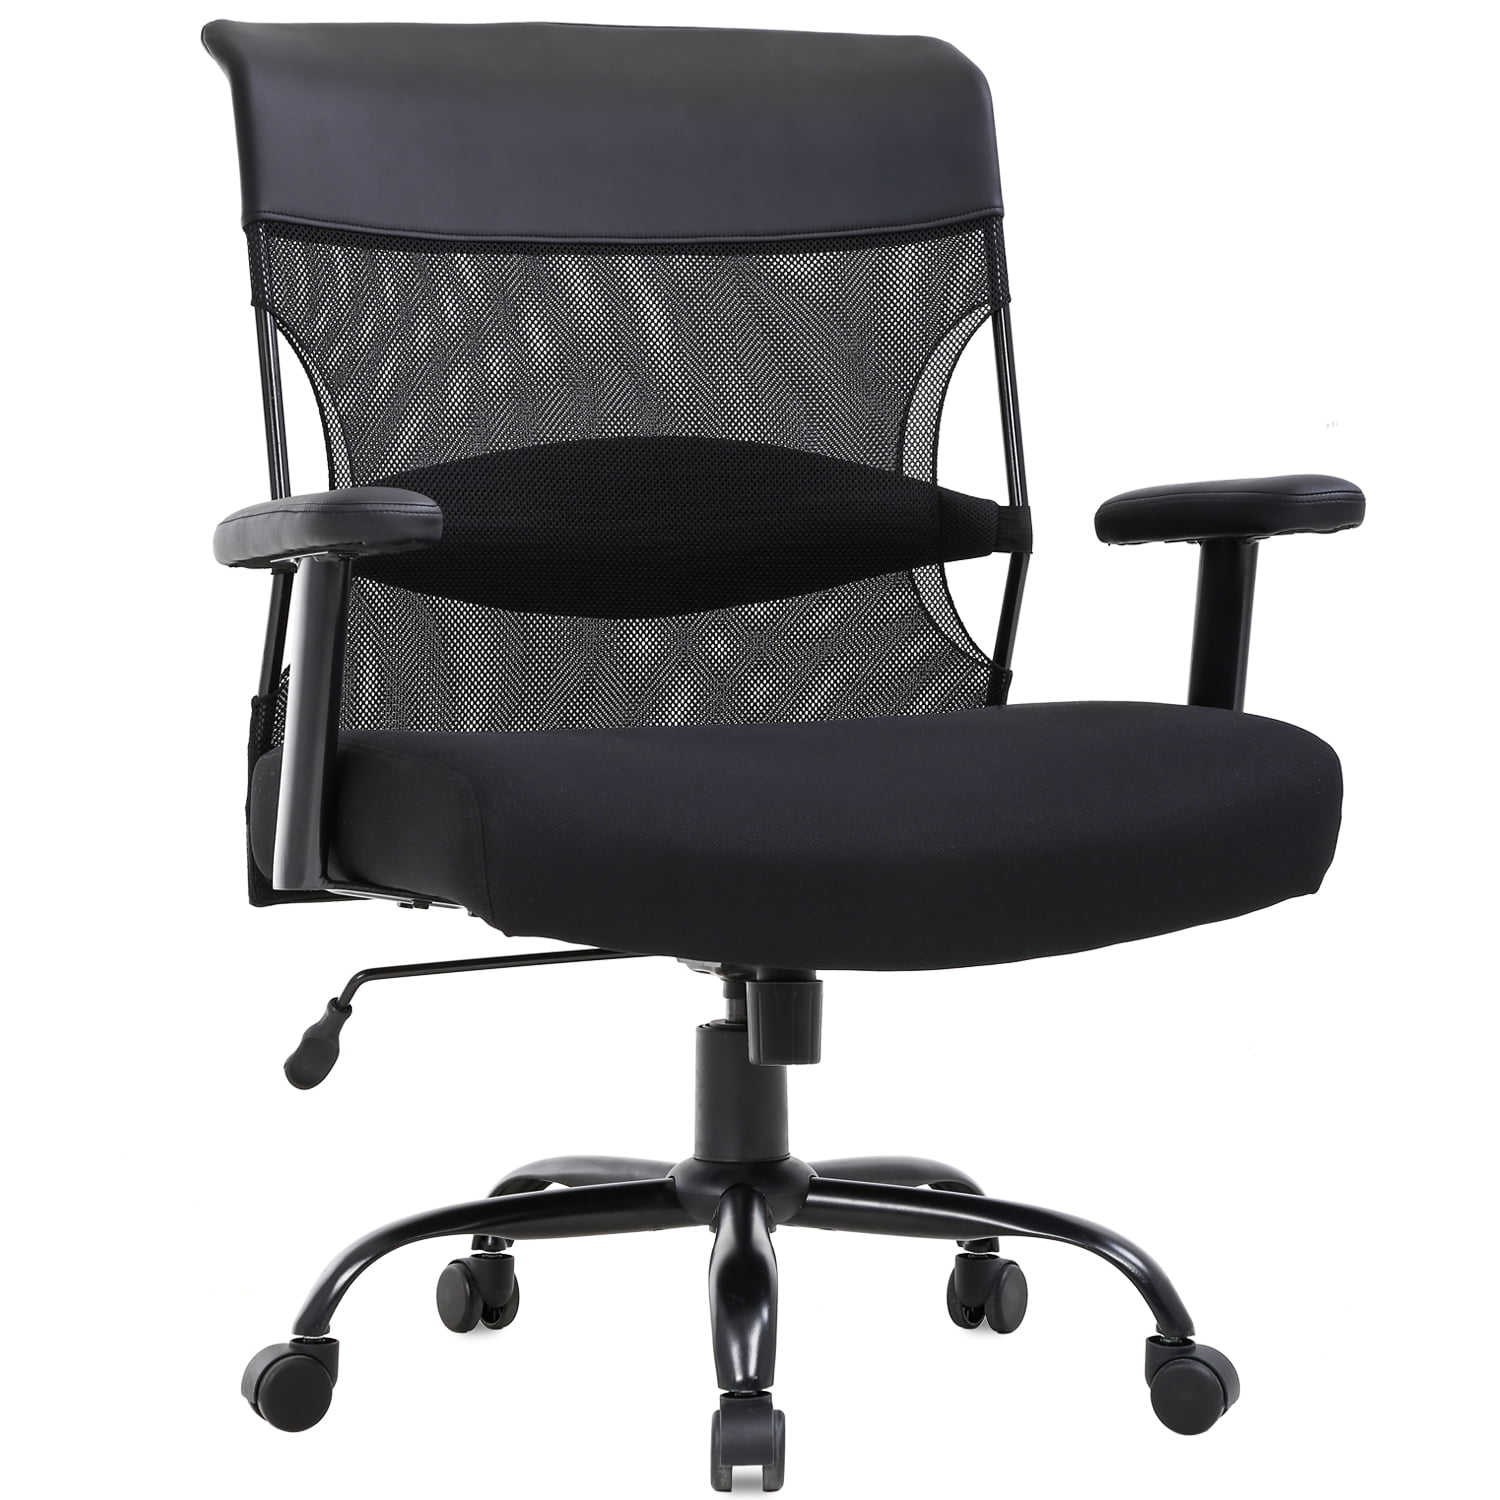 Tall Office Chair / Lazy Boy Big and Tall Office Chair 2020